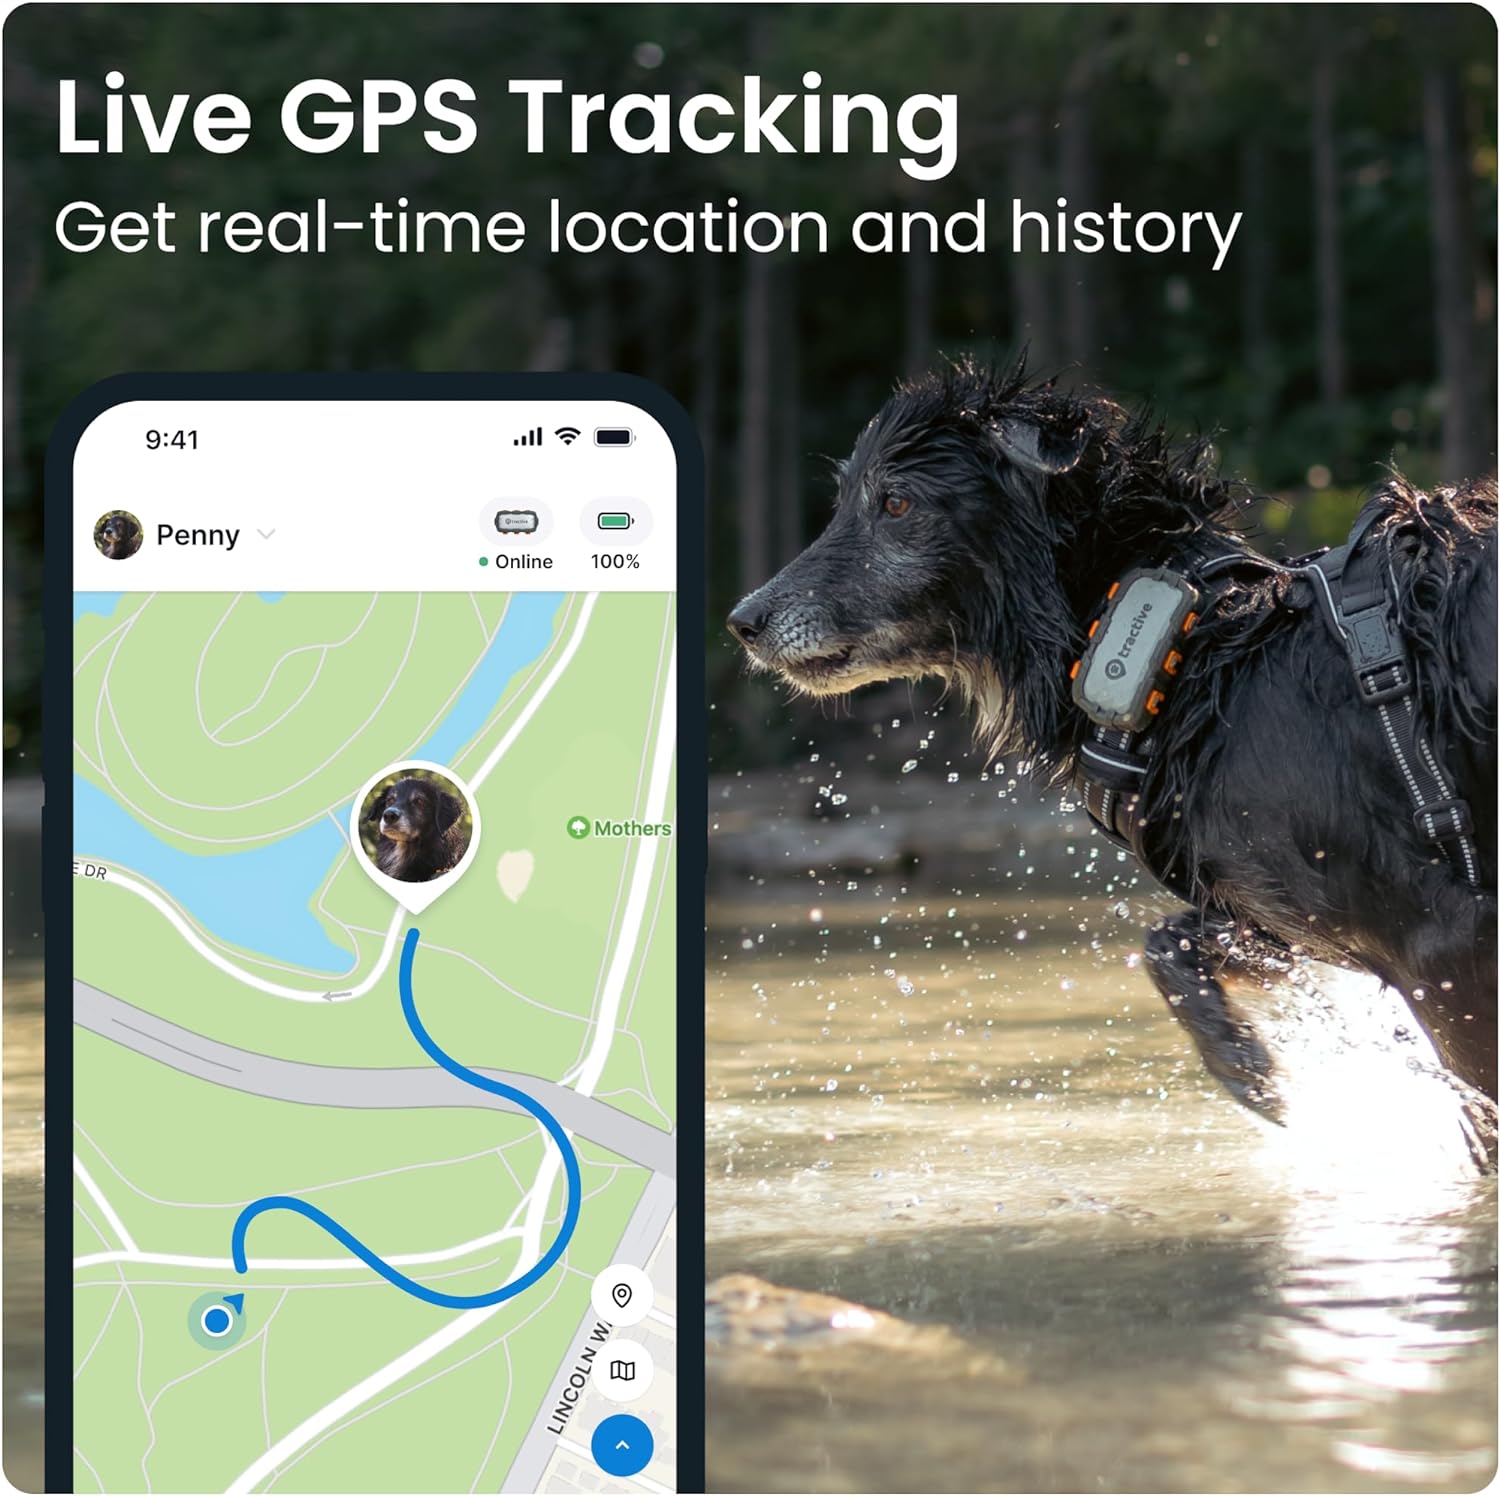 Tractive XL GPS Tracker Health Monitoring for Dogs (50 lbs+) - Market Leading Pet GPS Location Tracker | Wellness Escape Alerts | Waterproof | Works with Any Collar (Adventure Edition)